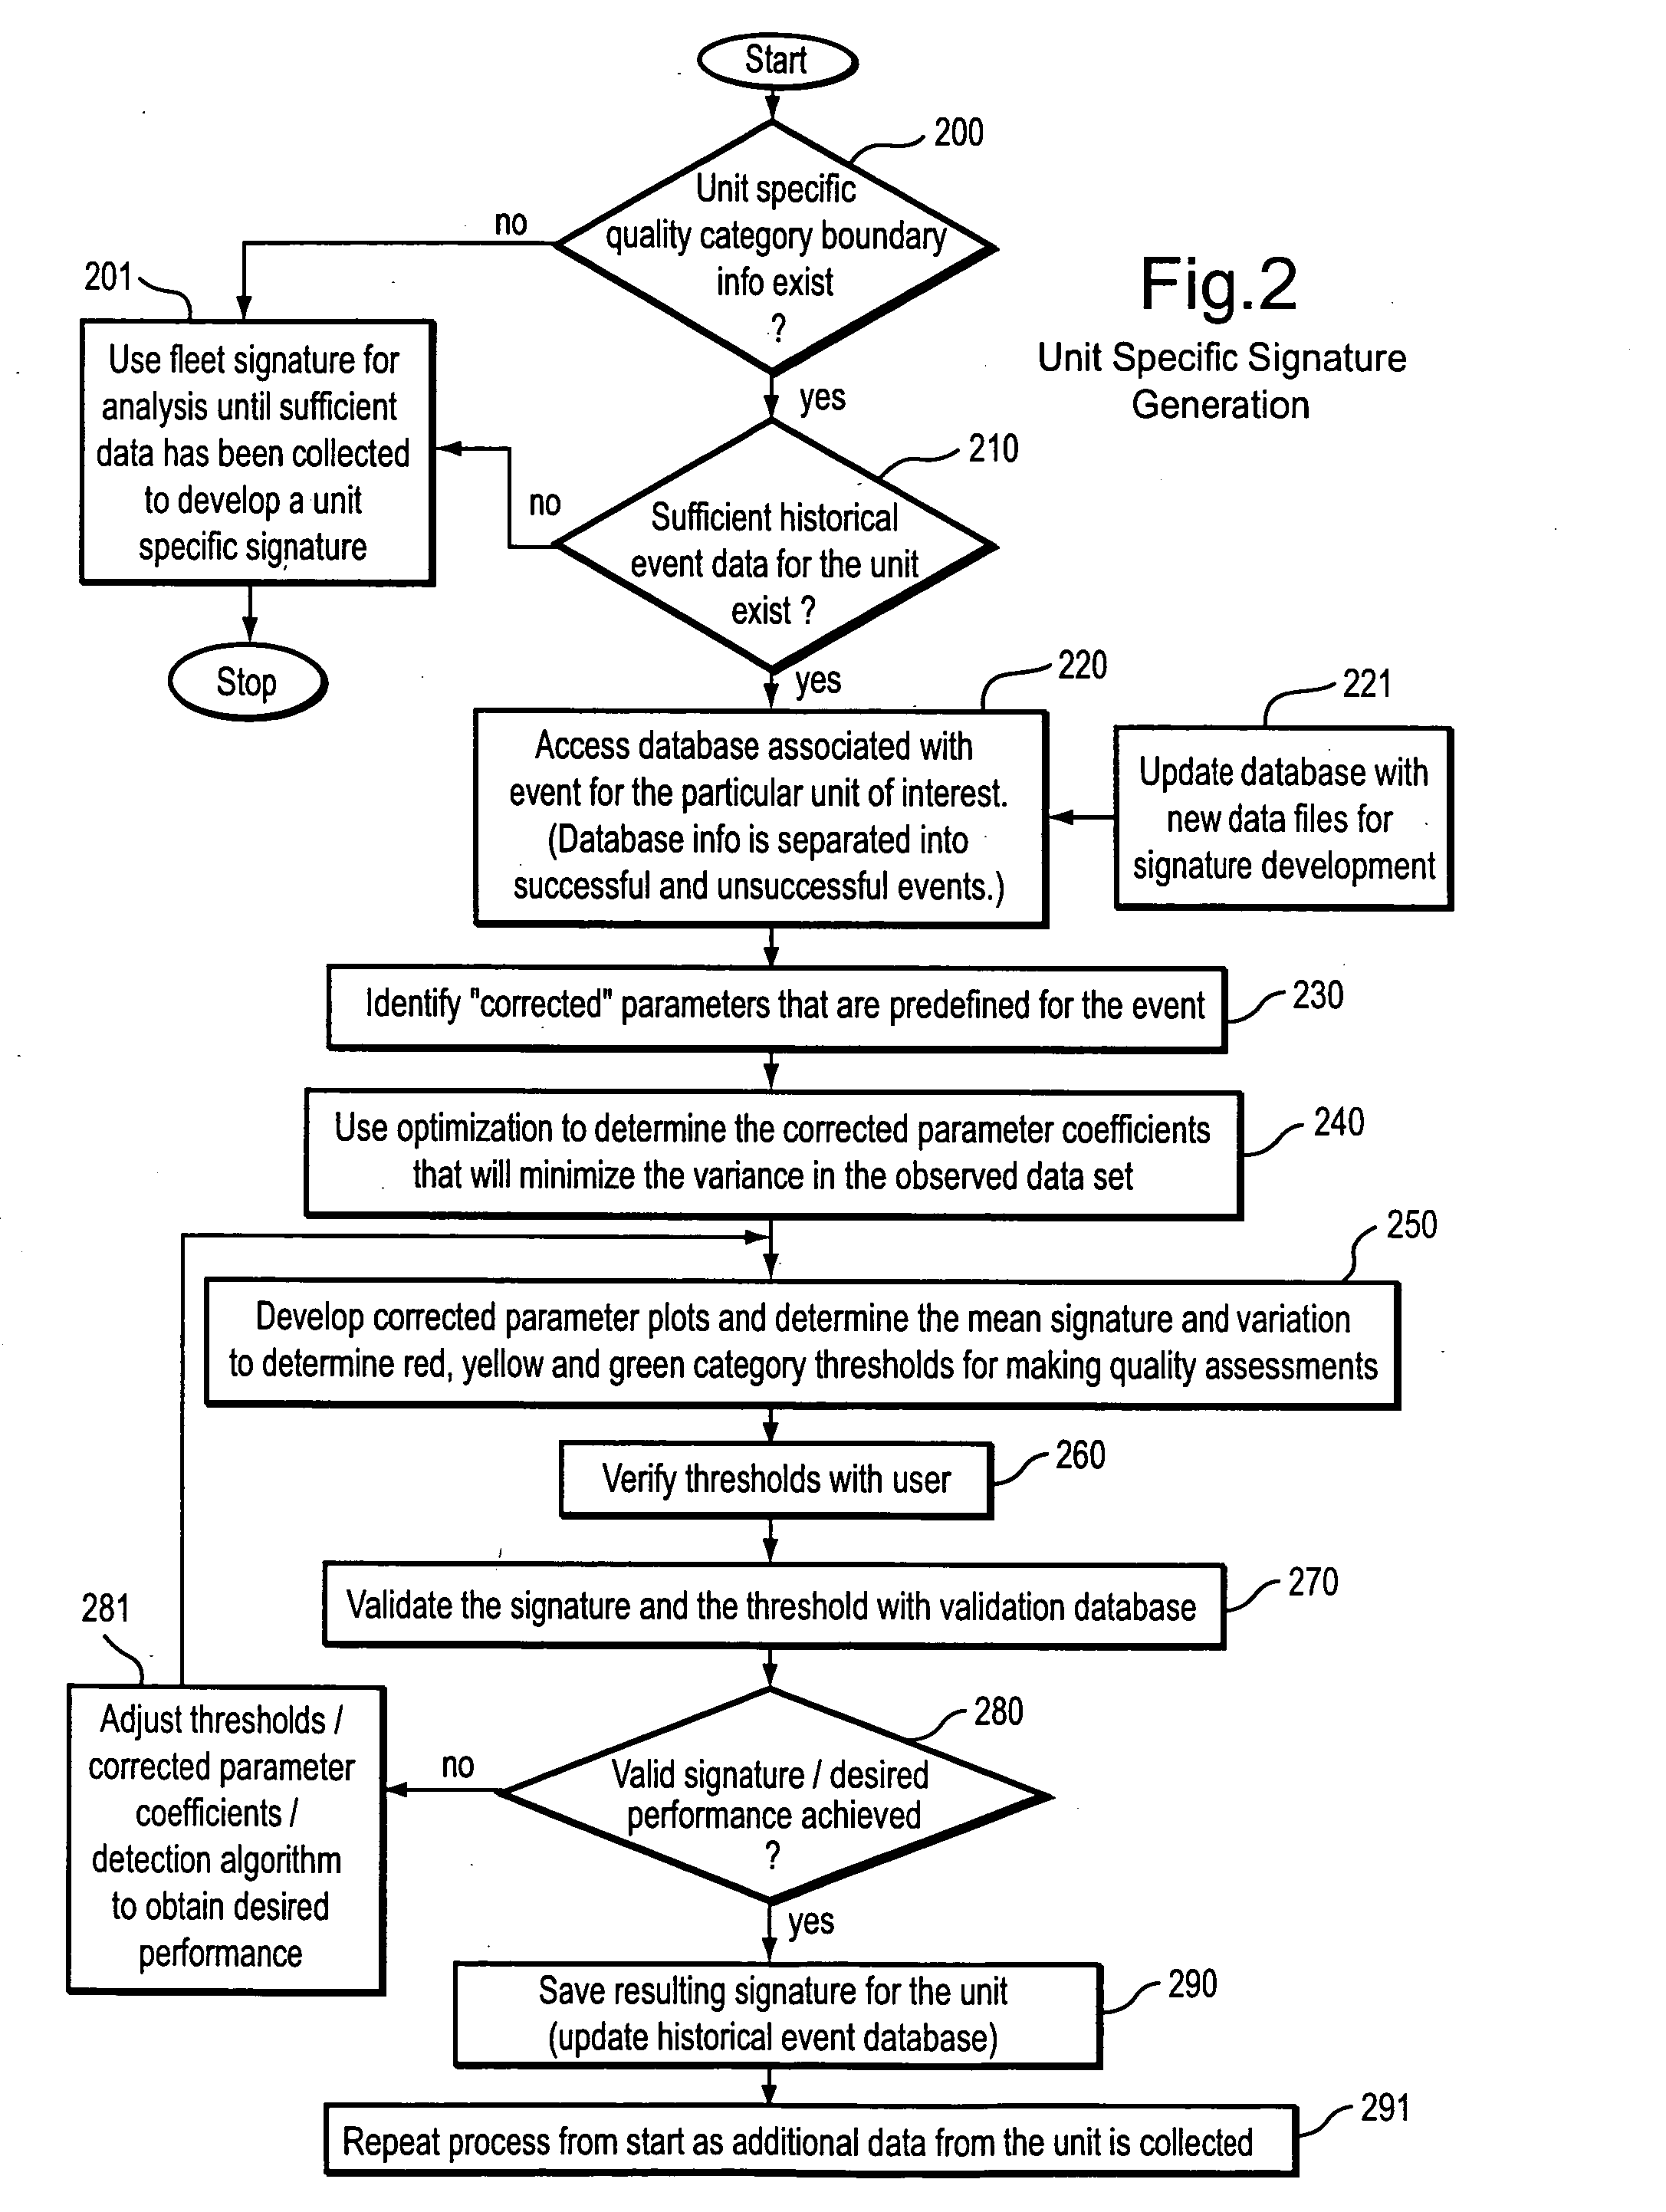 Method for developing a unified quality assessment and providing an automated fault diagnostic tool for turbine machine systems and the like